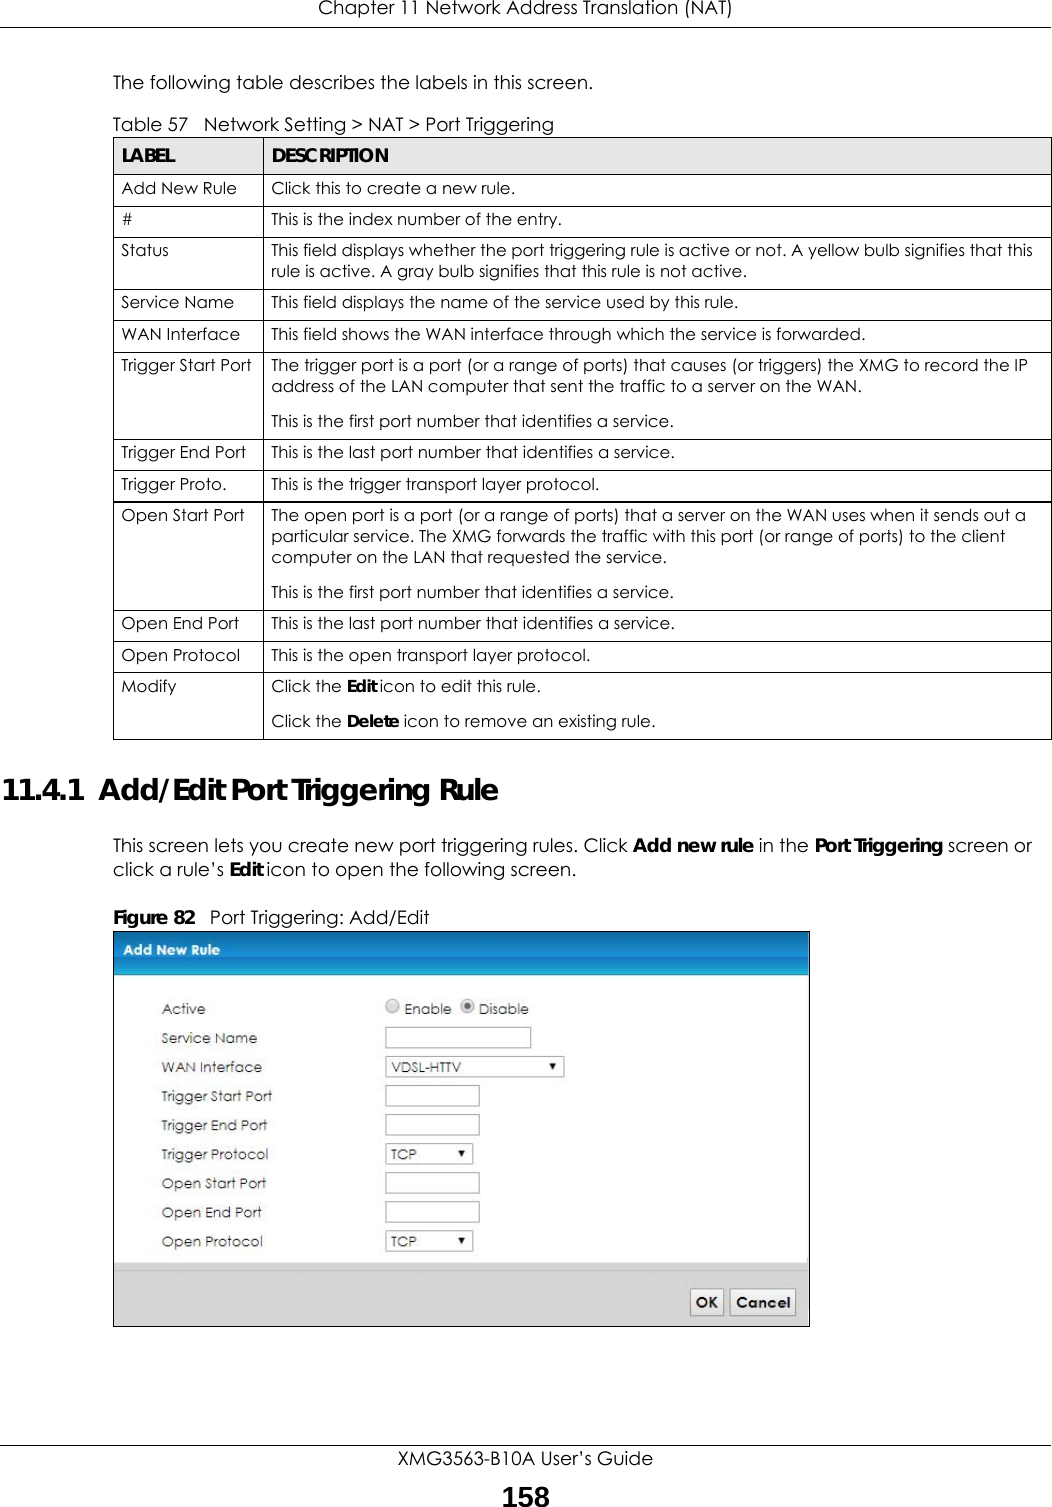 Chapter 11 Network Address Translation (NAT)XMG3563-B10A User’s Guide158The following table describes the labels in this screen. 11.4.1  Add/Edit Port Triggering Rule This screen lets you create new port triggering rules. Click Add new rule in the Port Triggering screen or click a rule’s Edit icon to open the following screen.Figure 82   Port Triggering: Add/Edit Table 57   Network Setting &gt; NAT &gt; Port TriggeringLABEL DESCRIPTIONAdd New Rule Click this to create a new rule.#This is the index number of the entry.Status This field displays whether the port triggering rule is active or not. A yellow bulb signifies that this rule is active. A gray bulb signifies that this rule is not active.Service Name This field displays the name of the service used by this rule.WAN Interface This field shows the WAN interface through which the service is forwarded.Trigger Start Port The trigger port is a port (or a range of ports) that causes (or triggers) the XMG to record the IP address of the LAN computer that sent the traffic to a server on the WAN.This is the first port number that identifies a service.Trigger End Port This is the last port number that identifies a service.Trigger Proto. This is the trigger transport layer protocol. Open Start Port The open port is a port (or a range of ports) that a server on the WAN uses when it sends out a particular service. The XMG forwards the traffic with this port (or range of ports) to the client computer on the LAN that requested the service. This is the first port number that identifies a service.Open End Port This is the last port number that identifies a service.Open Protocol This is the open transport layer protocol.Modify Click the Edit icon to edit this rule.Click the Delete icon to remove an existing rule. 